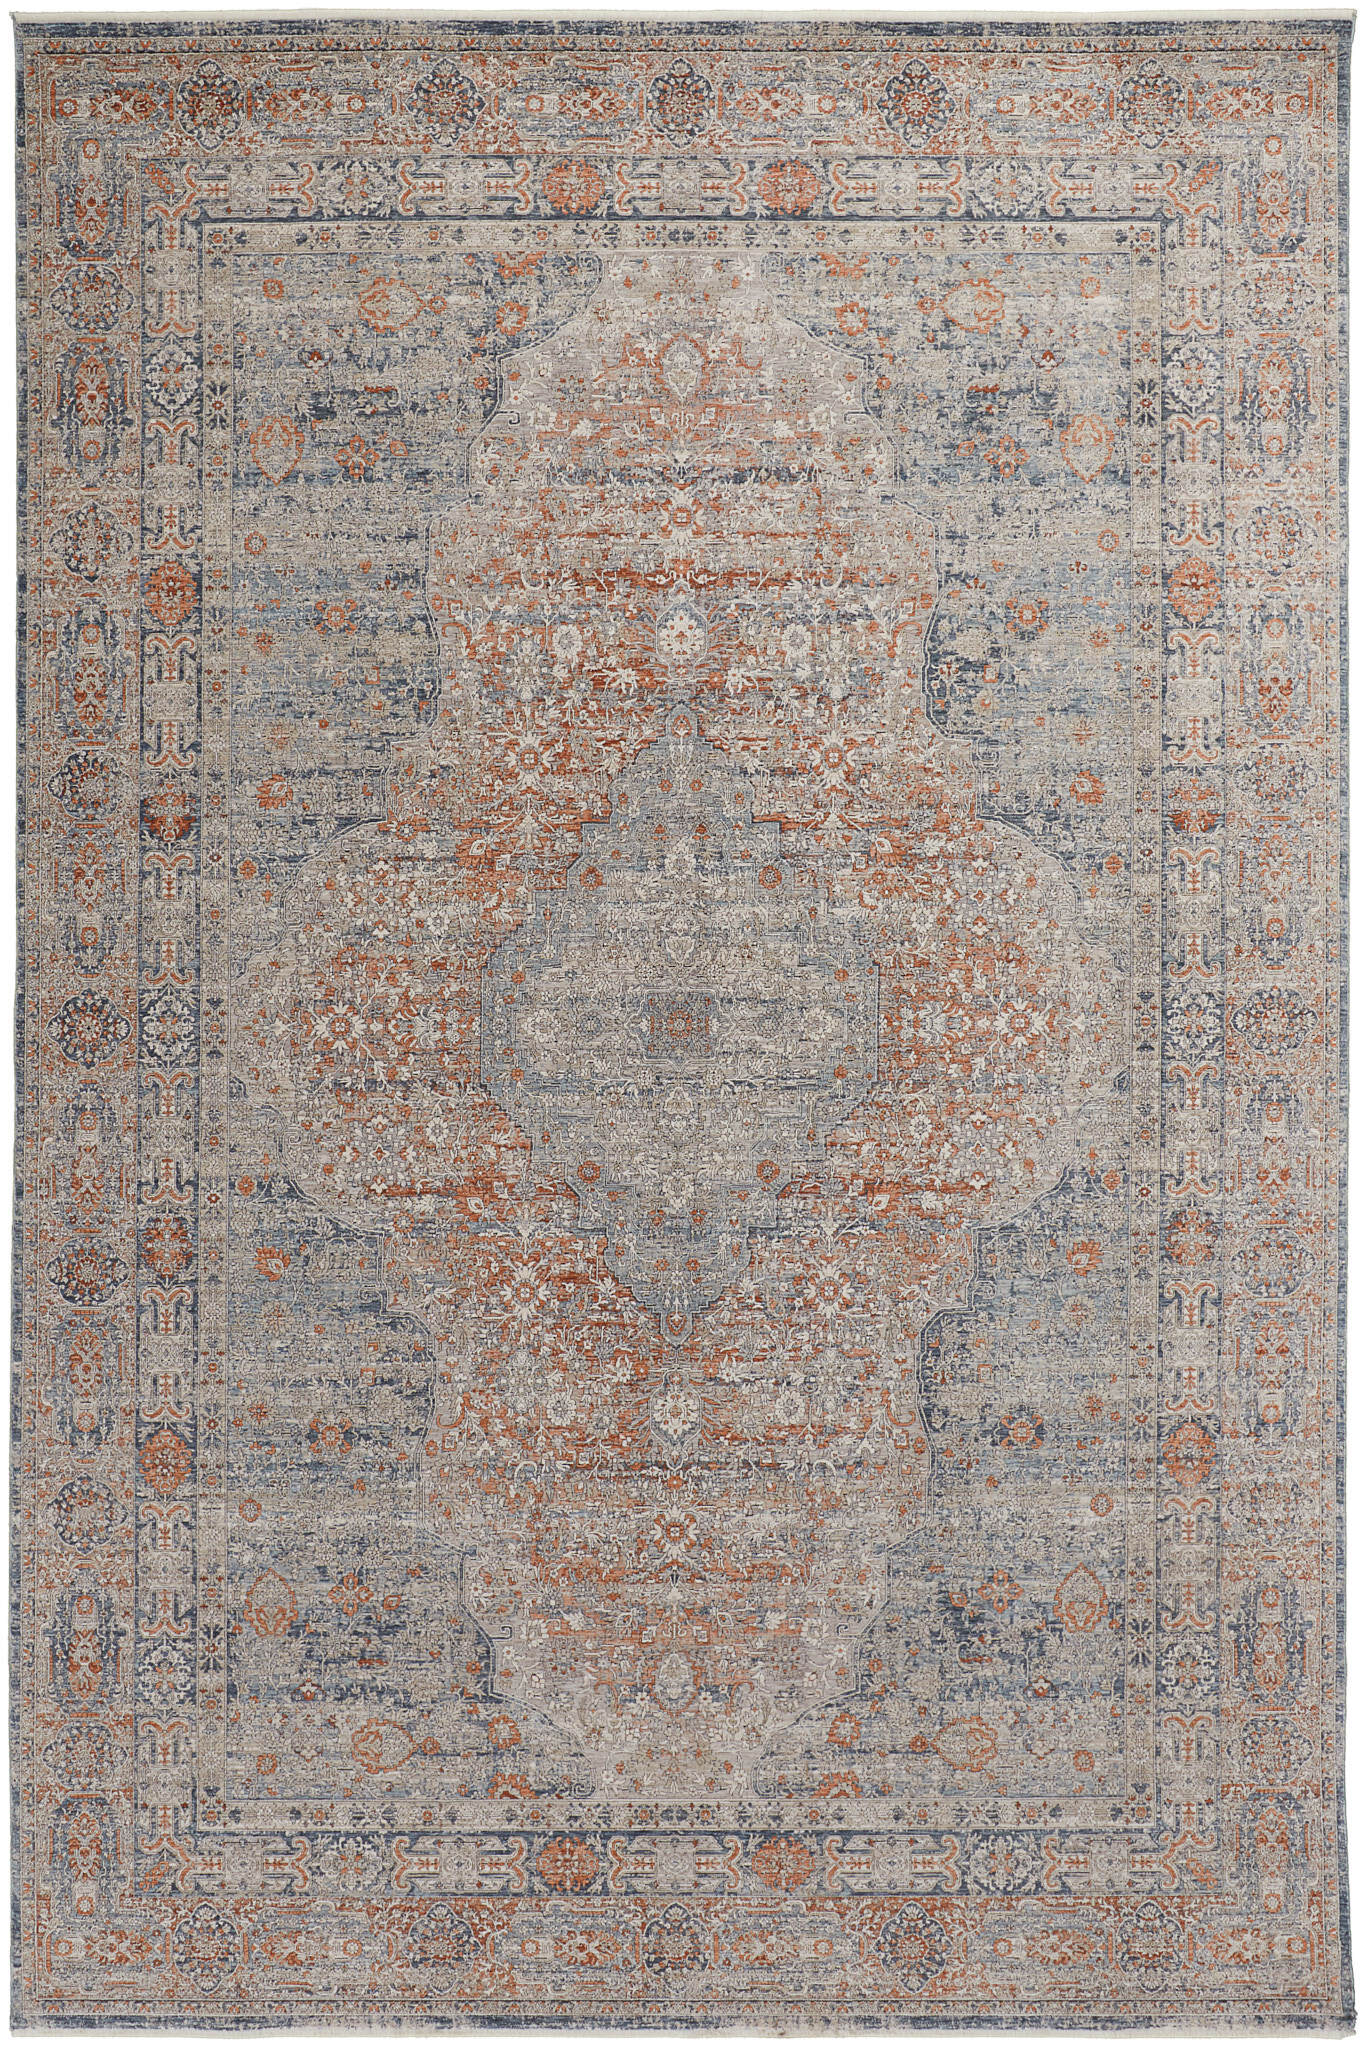 7ft-10in x 9ft-10in Rust/Aegean Blue Marquette Traditional Persian Style Feizy Rugs 